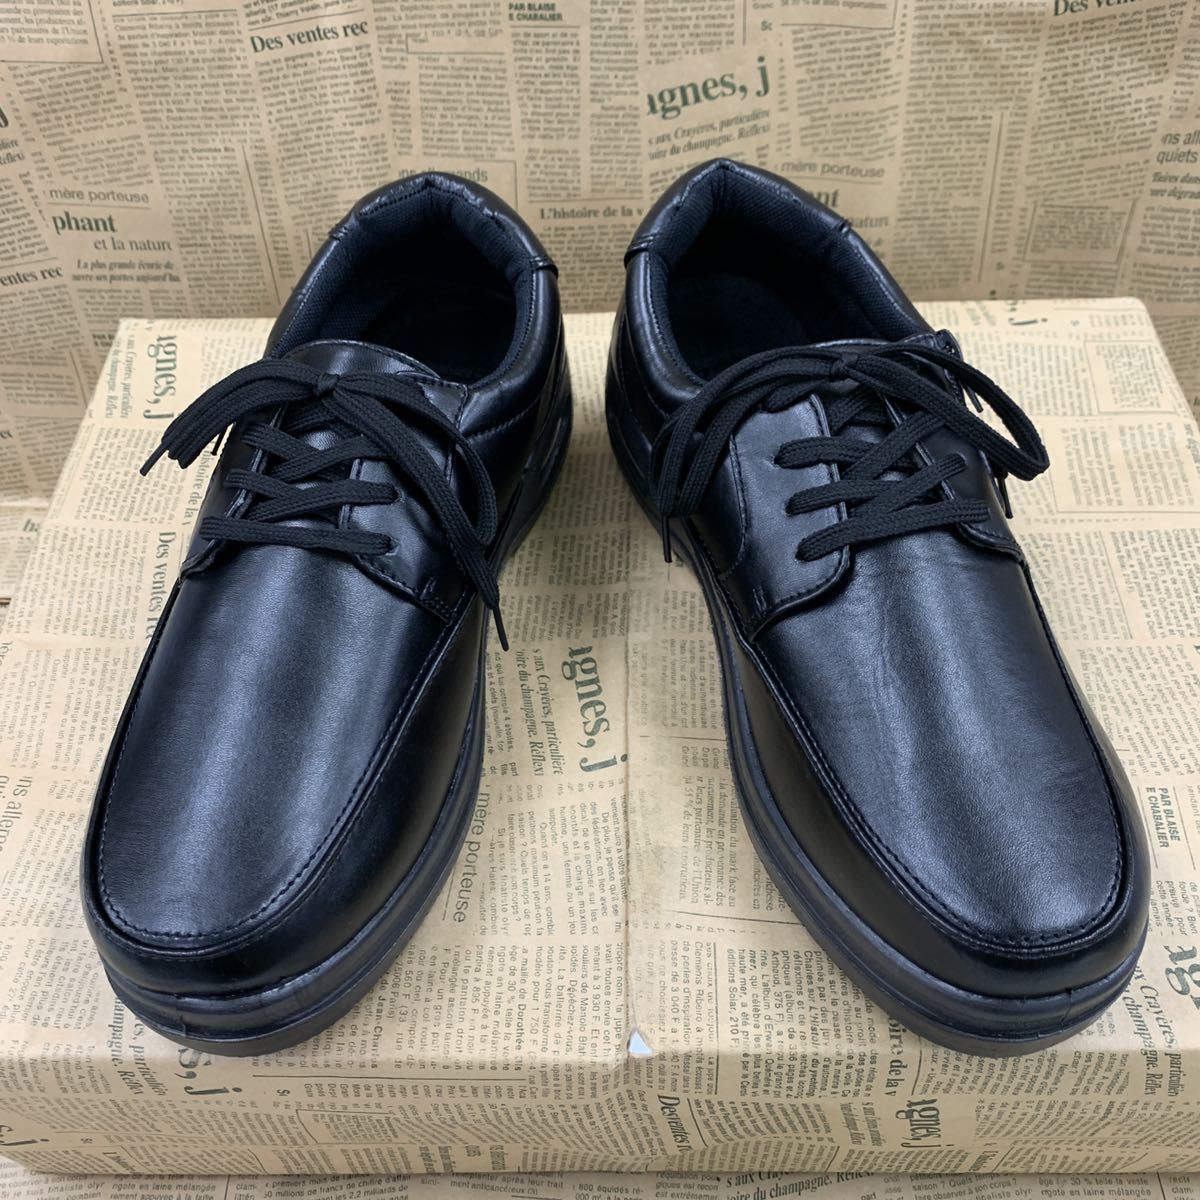  new goods men's 25.0cm light weight wide width air saw ru business shoes fake leather shoes water-repellent shoes business sneakers black black osw101